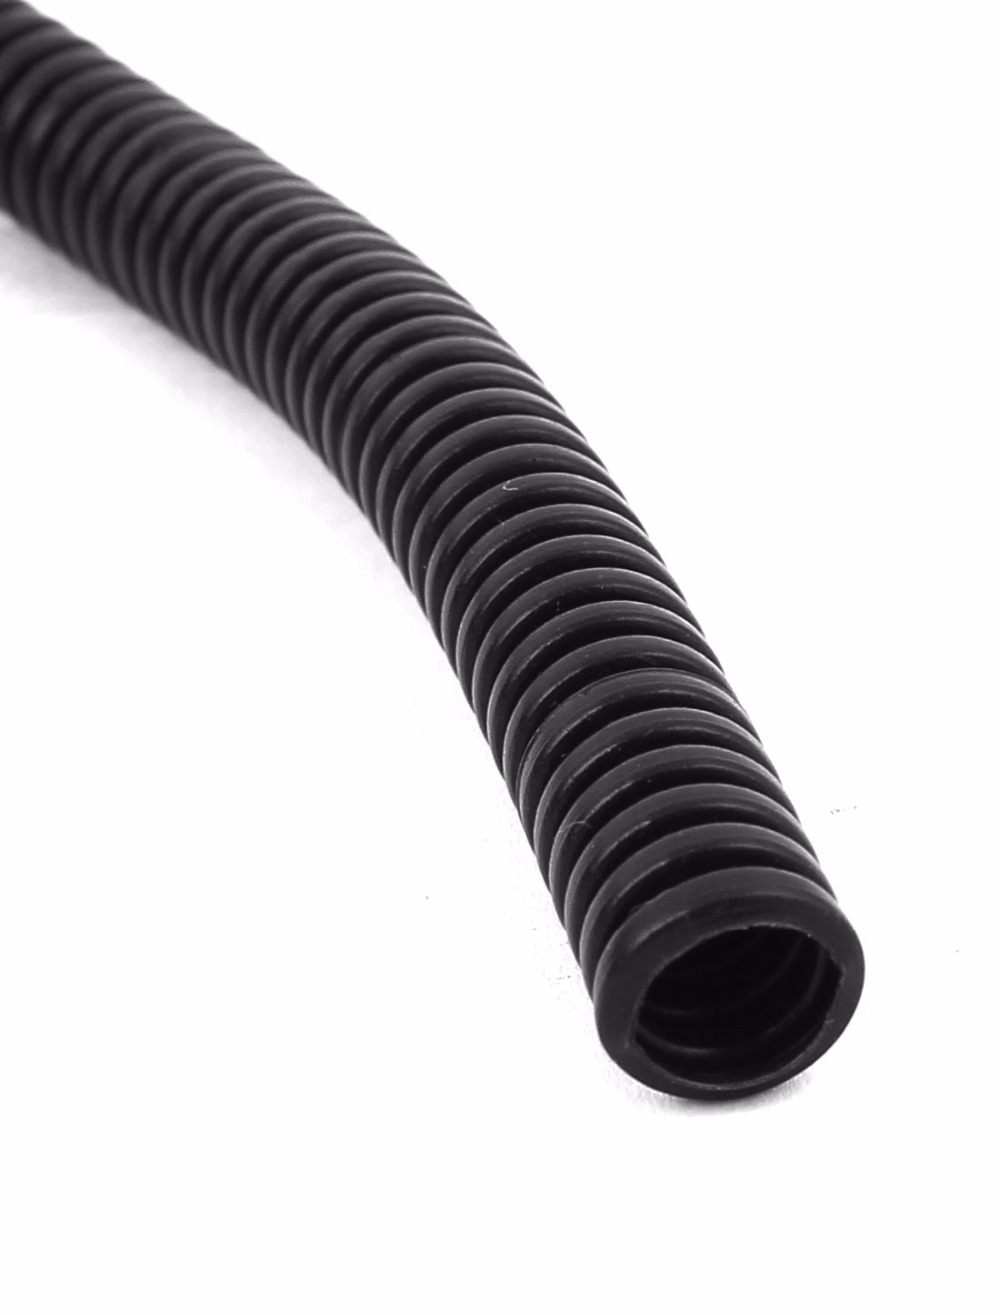 Uxcell 7mmx10mm Size 4.5m Long Black Flexible Insulated Polyethylene Corrugated Tube Hose Pipe for Wire Tubing Hot Sale